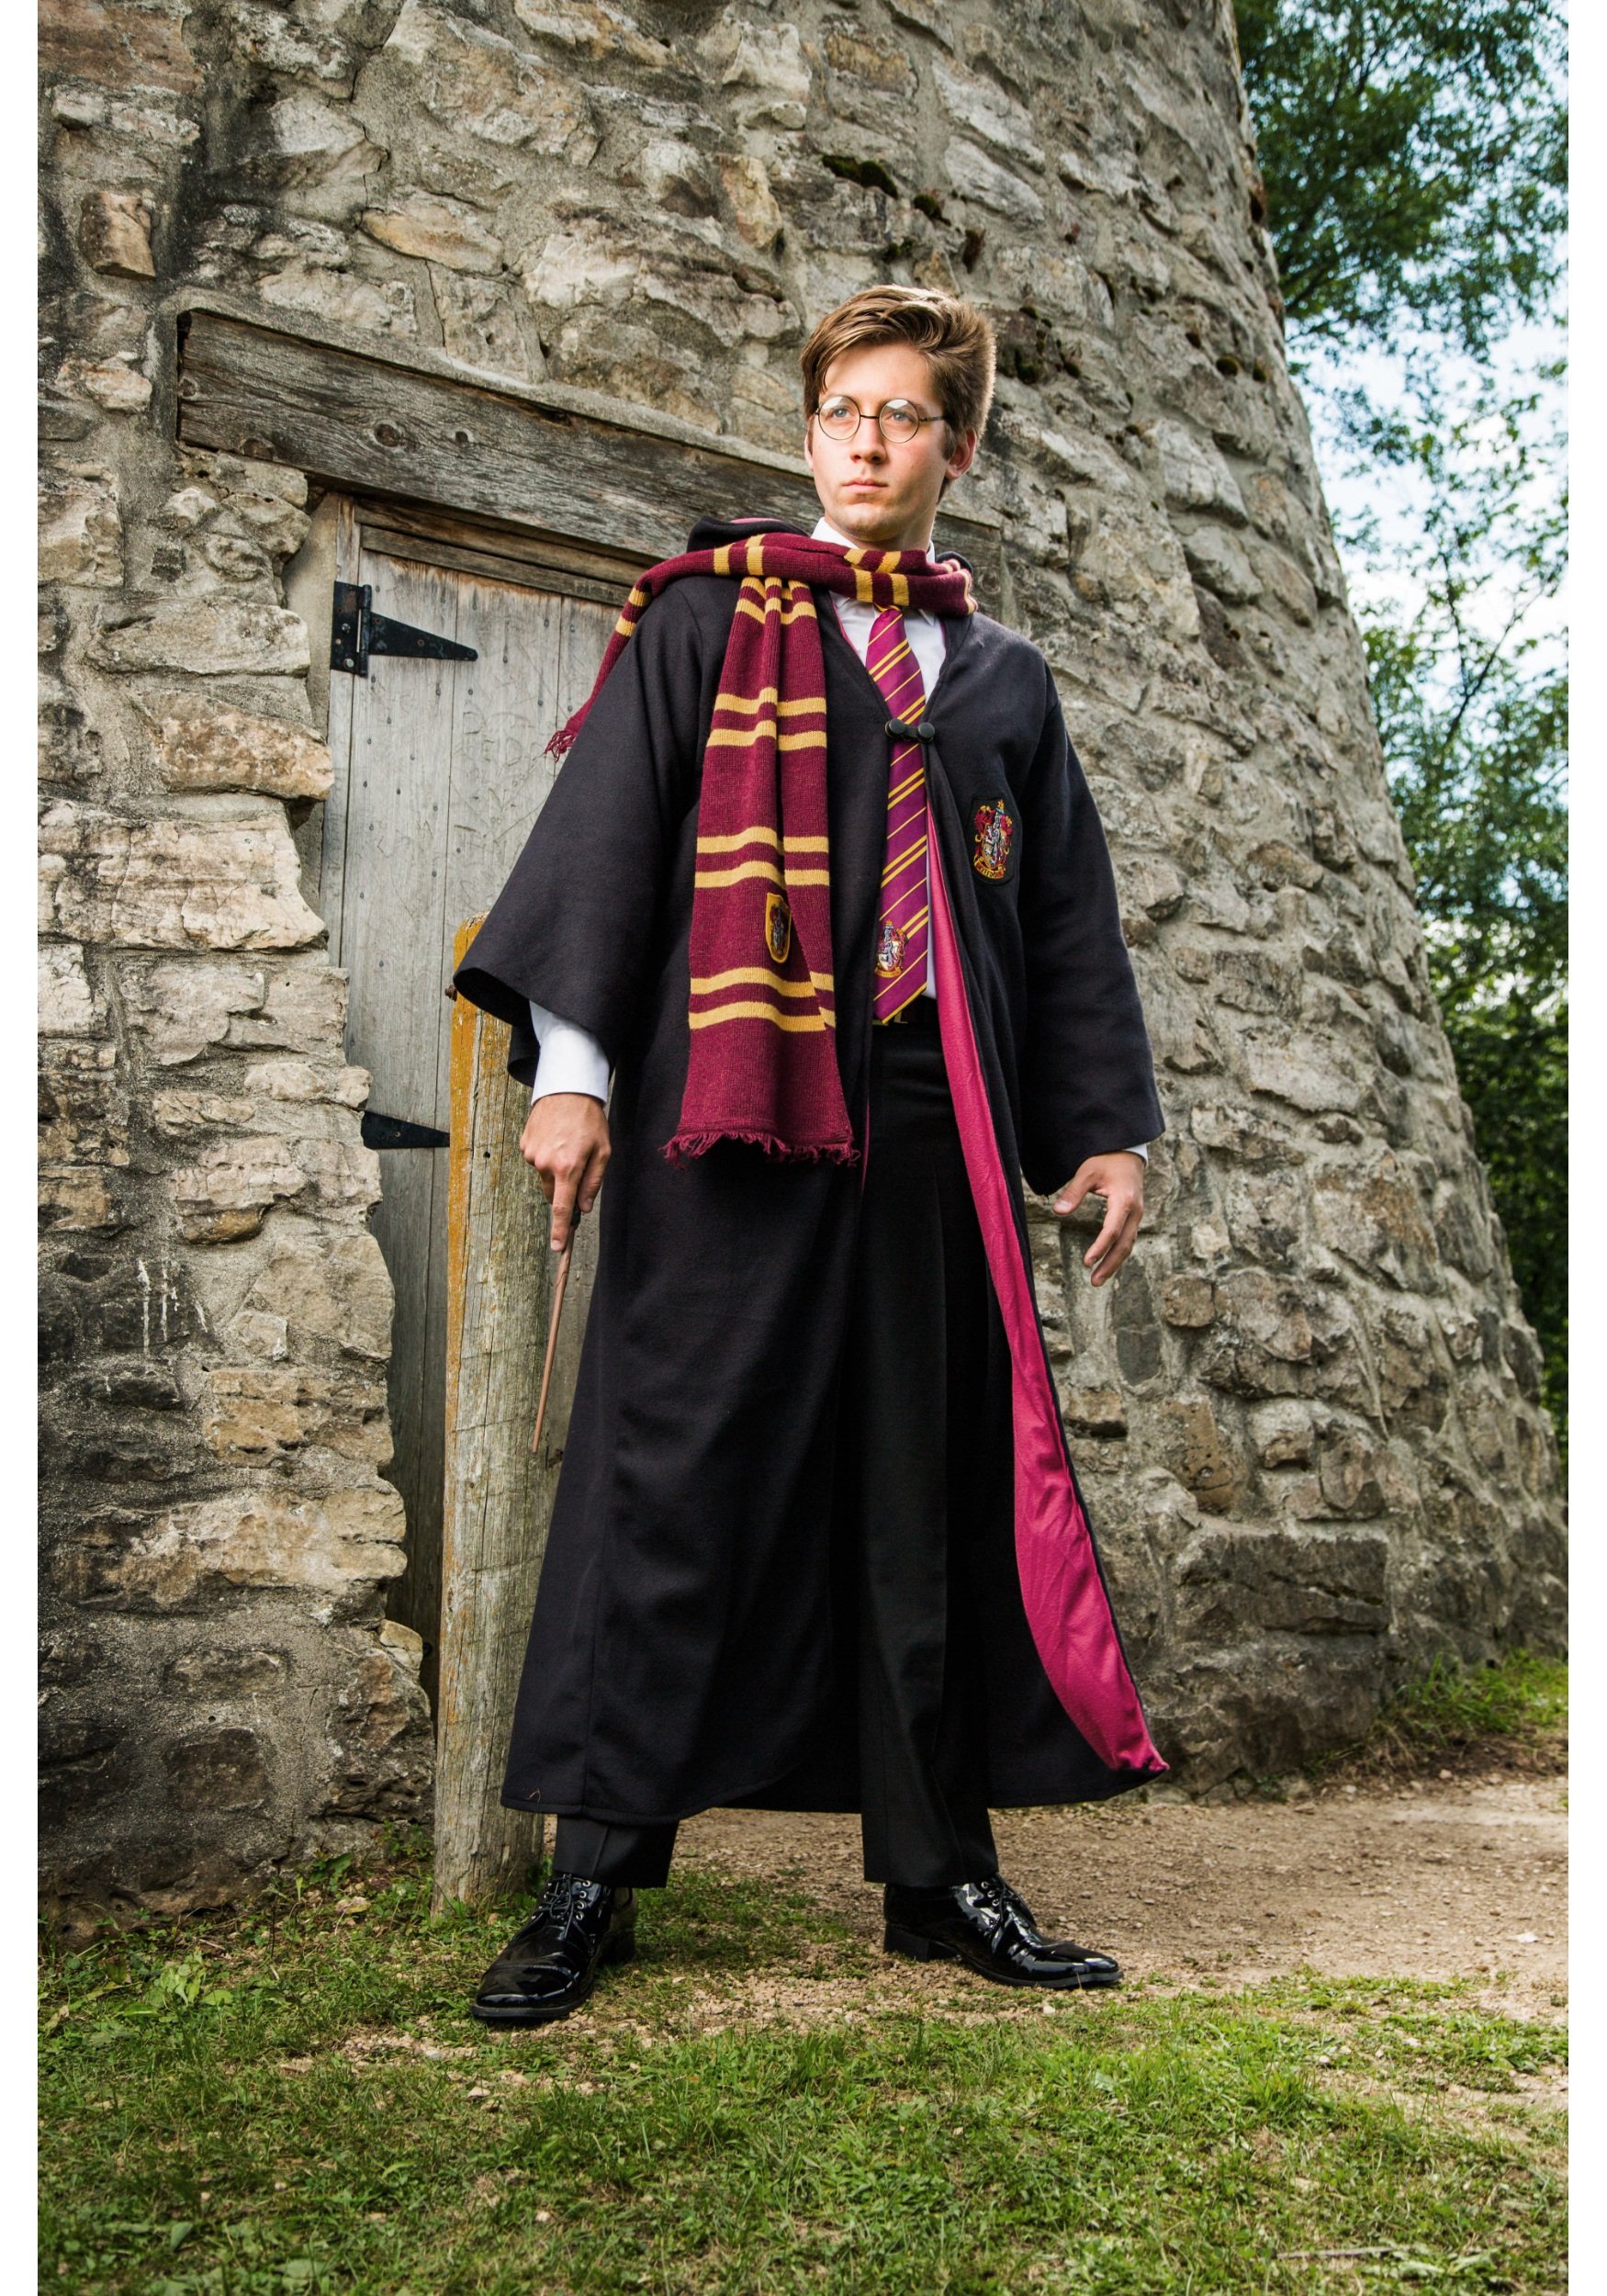 Adult Deluxe Harry Potter Costume